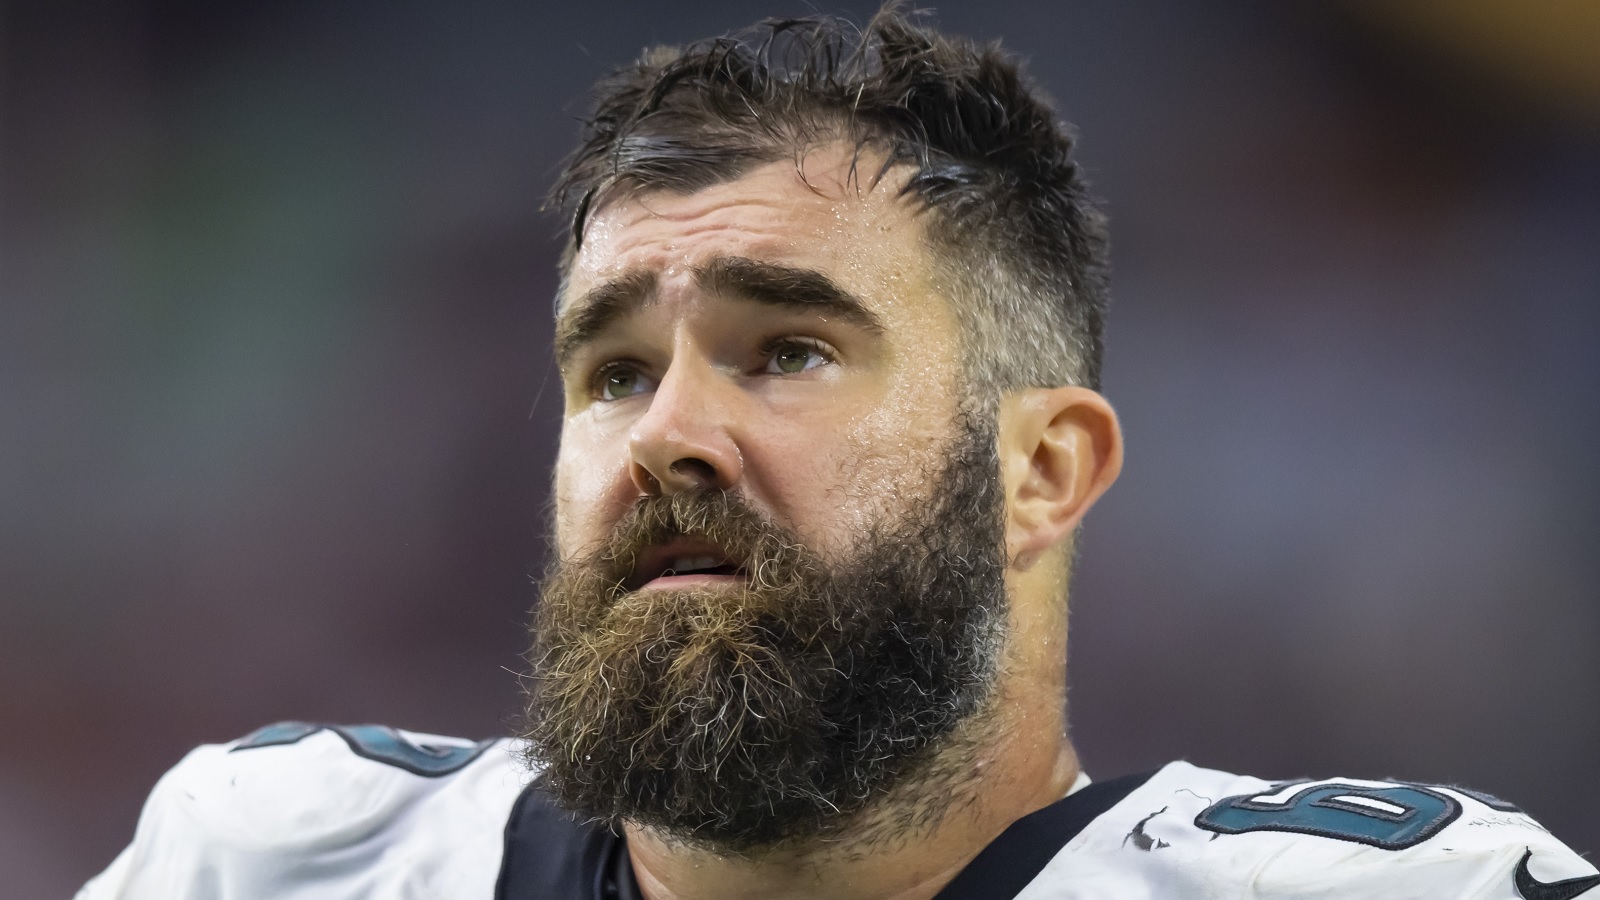 NFL News: Jason Kelce Believes Kansas City Chiefs’ New Signee Louis Rees-Zammit Has The Potential To Take NFL By Storm